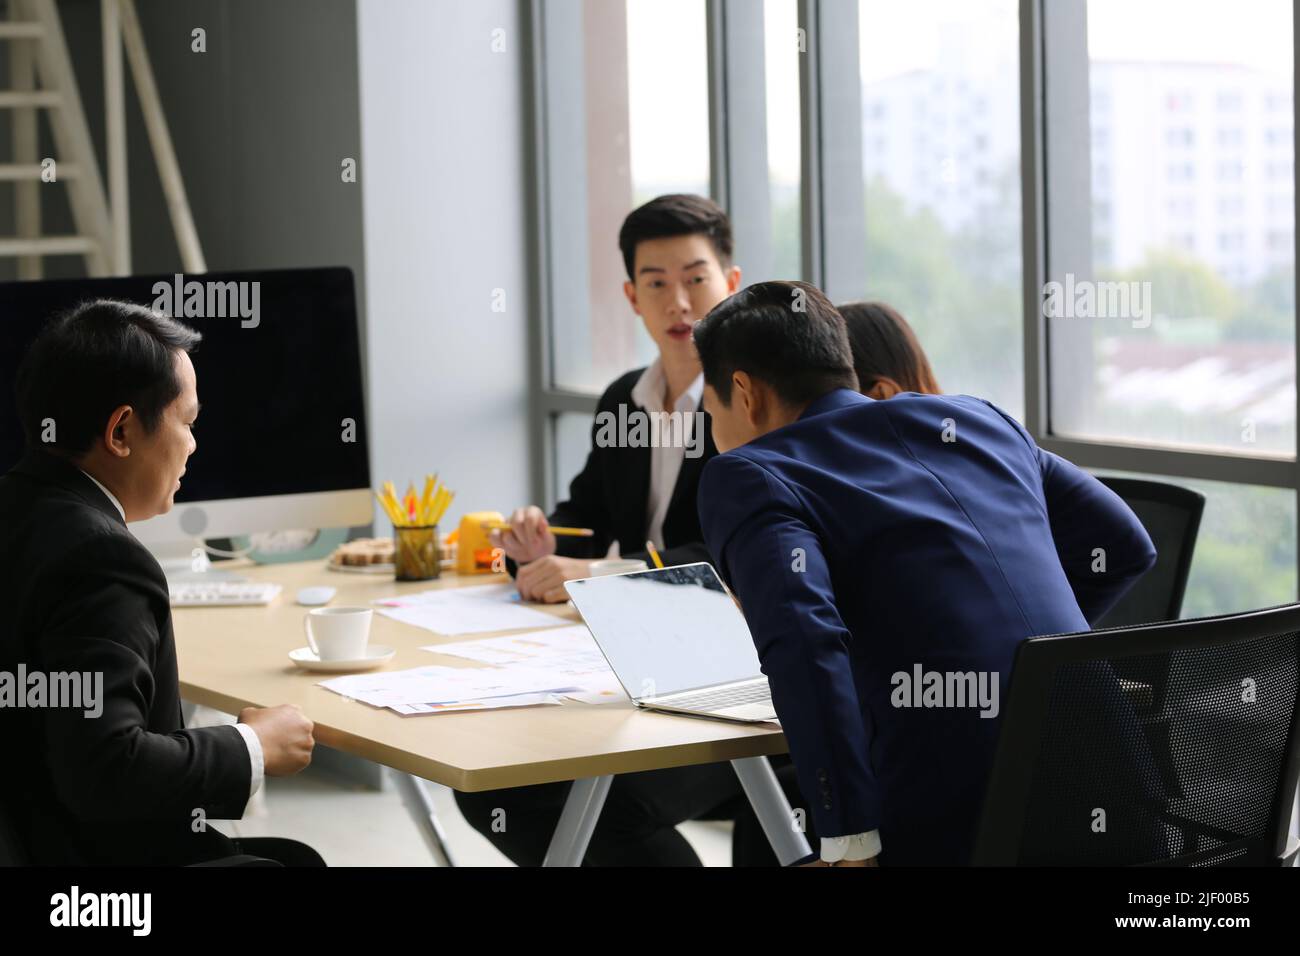 Businessman Giving Speech On Business Meeting With Colleagues, Discussing Work Ideas And Projects, Making Presentation Standing In Modern Office. Team Stock Photo